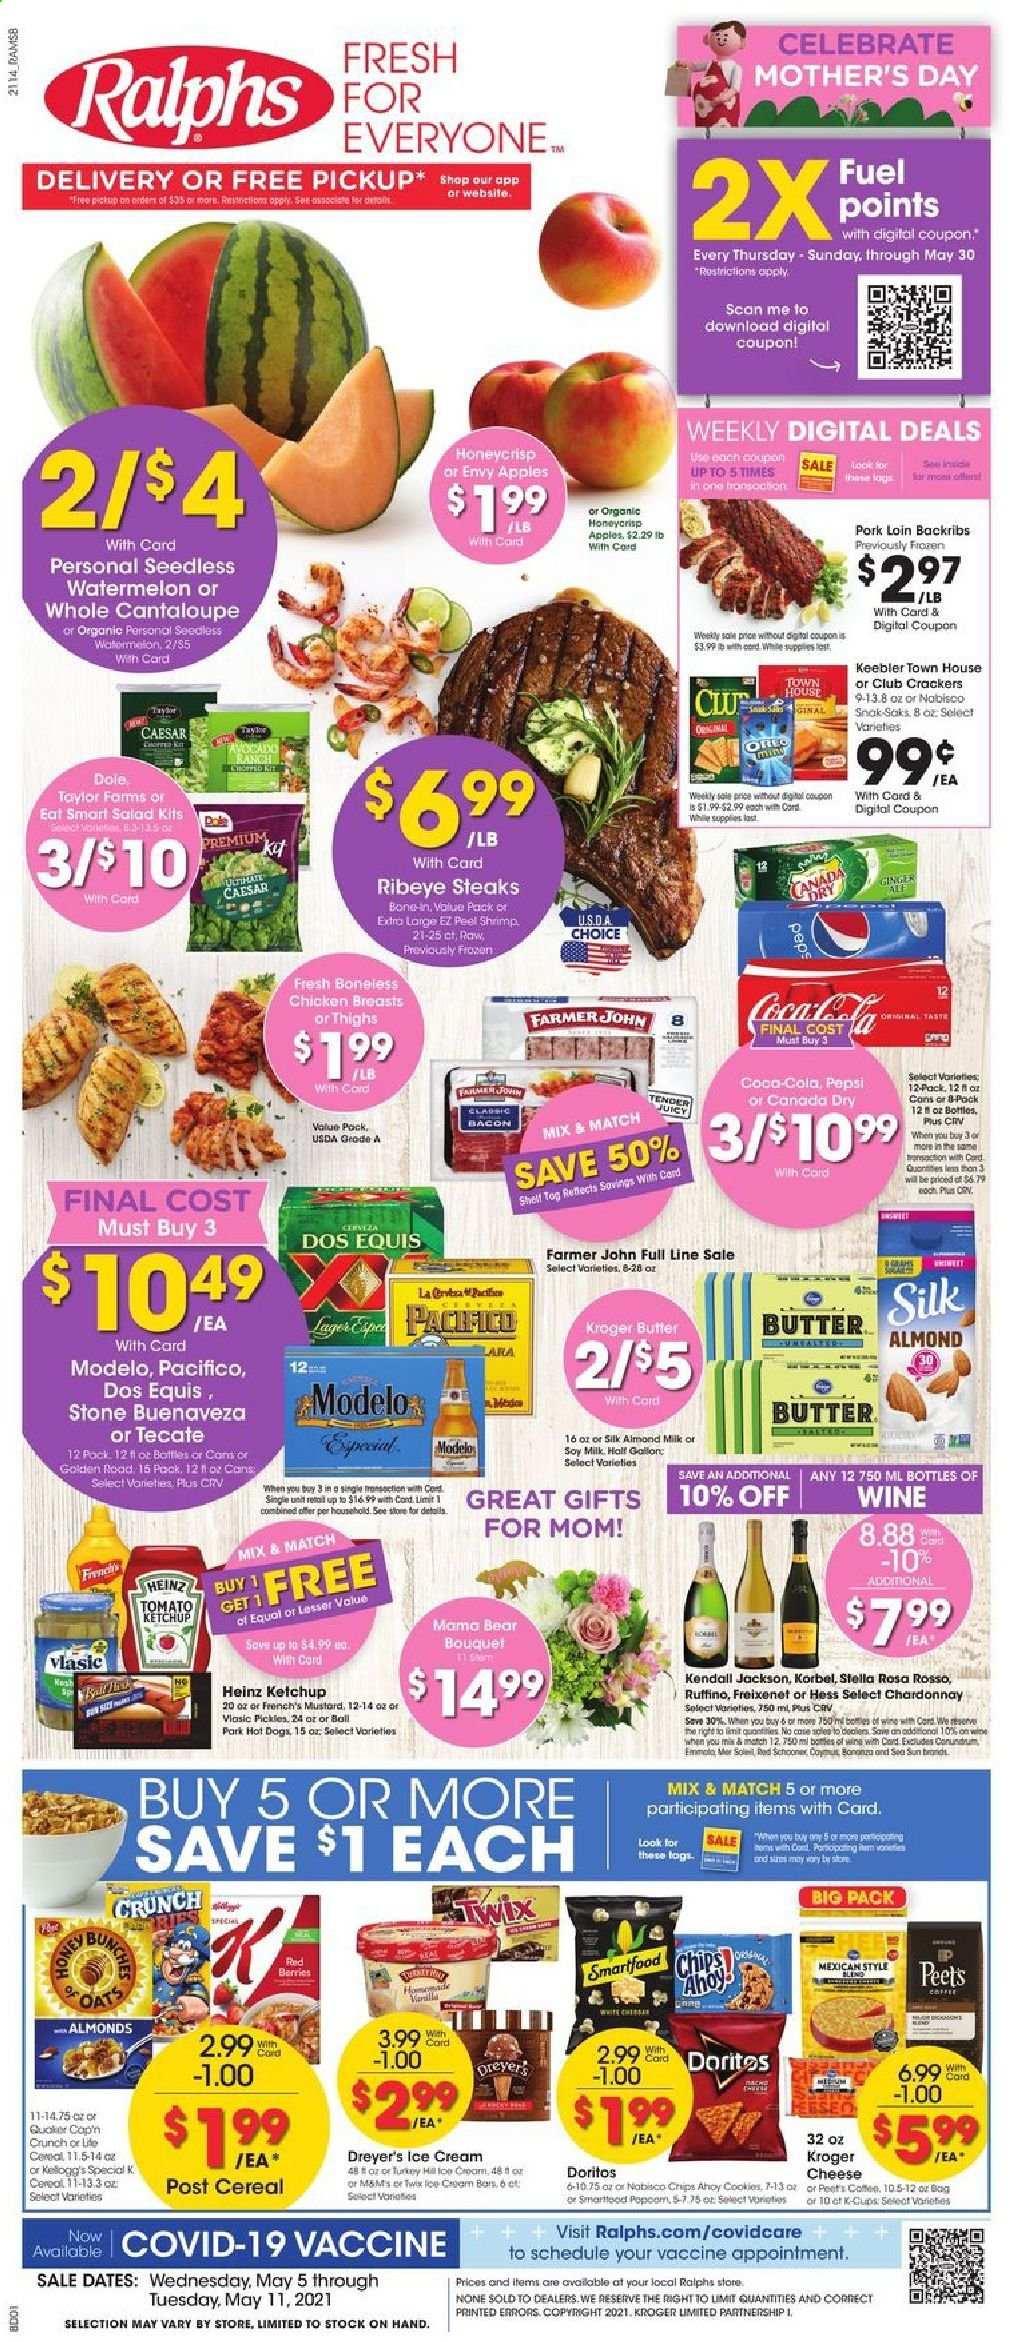 thumbnail - Ralphs Flyer - 05/05/2021 - 05/11/2021 - Sales products - cantaloupe, ginger, salad, Dole, apples, avocado, watermelon, shrimps, hot dog, Quaker, bacon, Oreo, almond milk, soy milk, butter, ice cream, Twix, crackers, Keebler, Doritos, Smartfood, oats, Heinz, cereals, Cap'n Crunch, mustard, ketchup, Canada Dry, Coca-Cola, Pepsi, coffee capsules, K-Cups, white wine, Chardonnay, wine, beer, Dos Equis, Modelo, chicken breasts, beef meat, steak, ribeye steak, pork loin, pork meat, bouquet. Page 1.